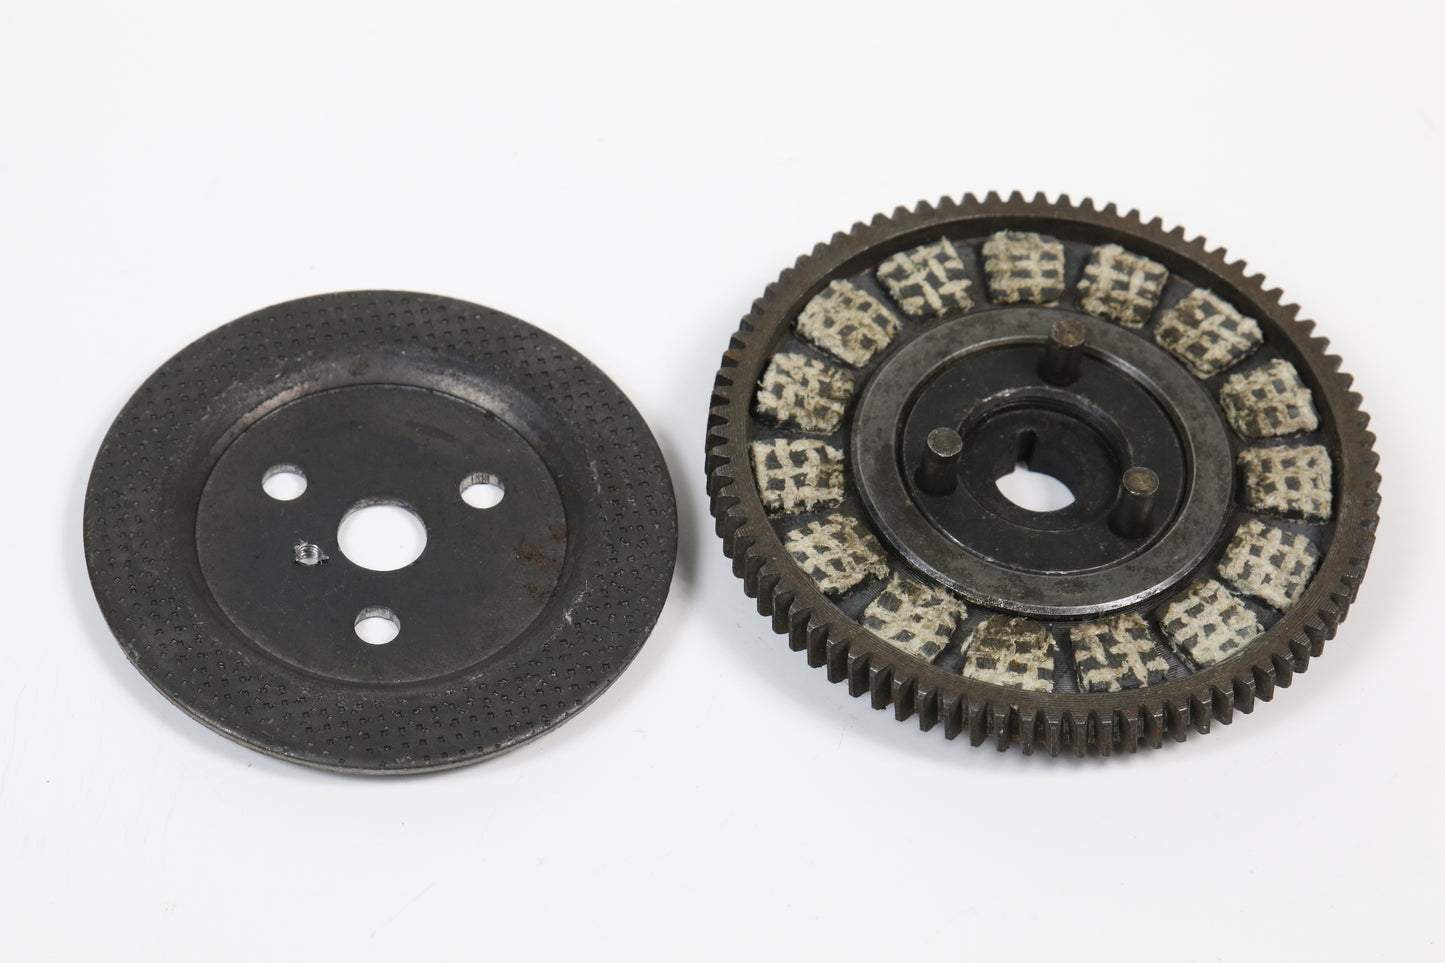 2 Stroke Motorized Bicycle Clutch Kit Replacement